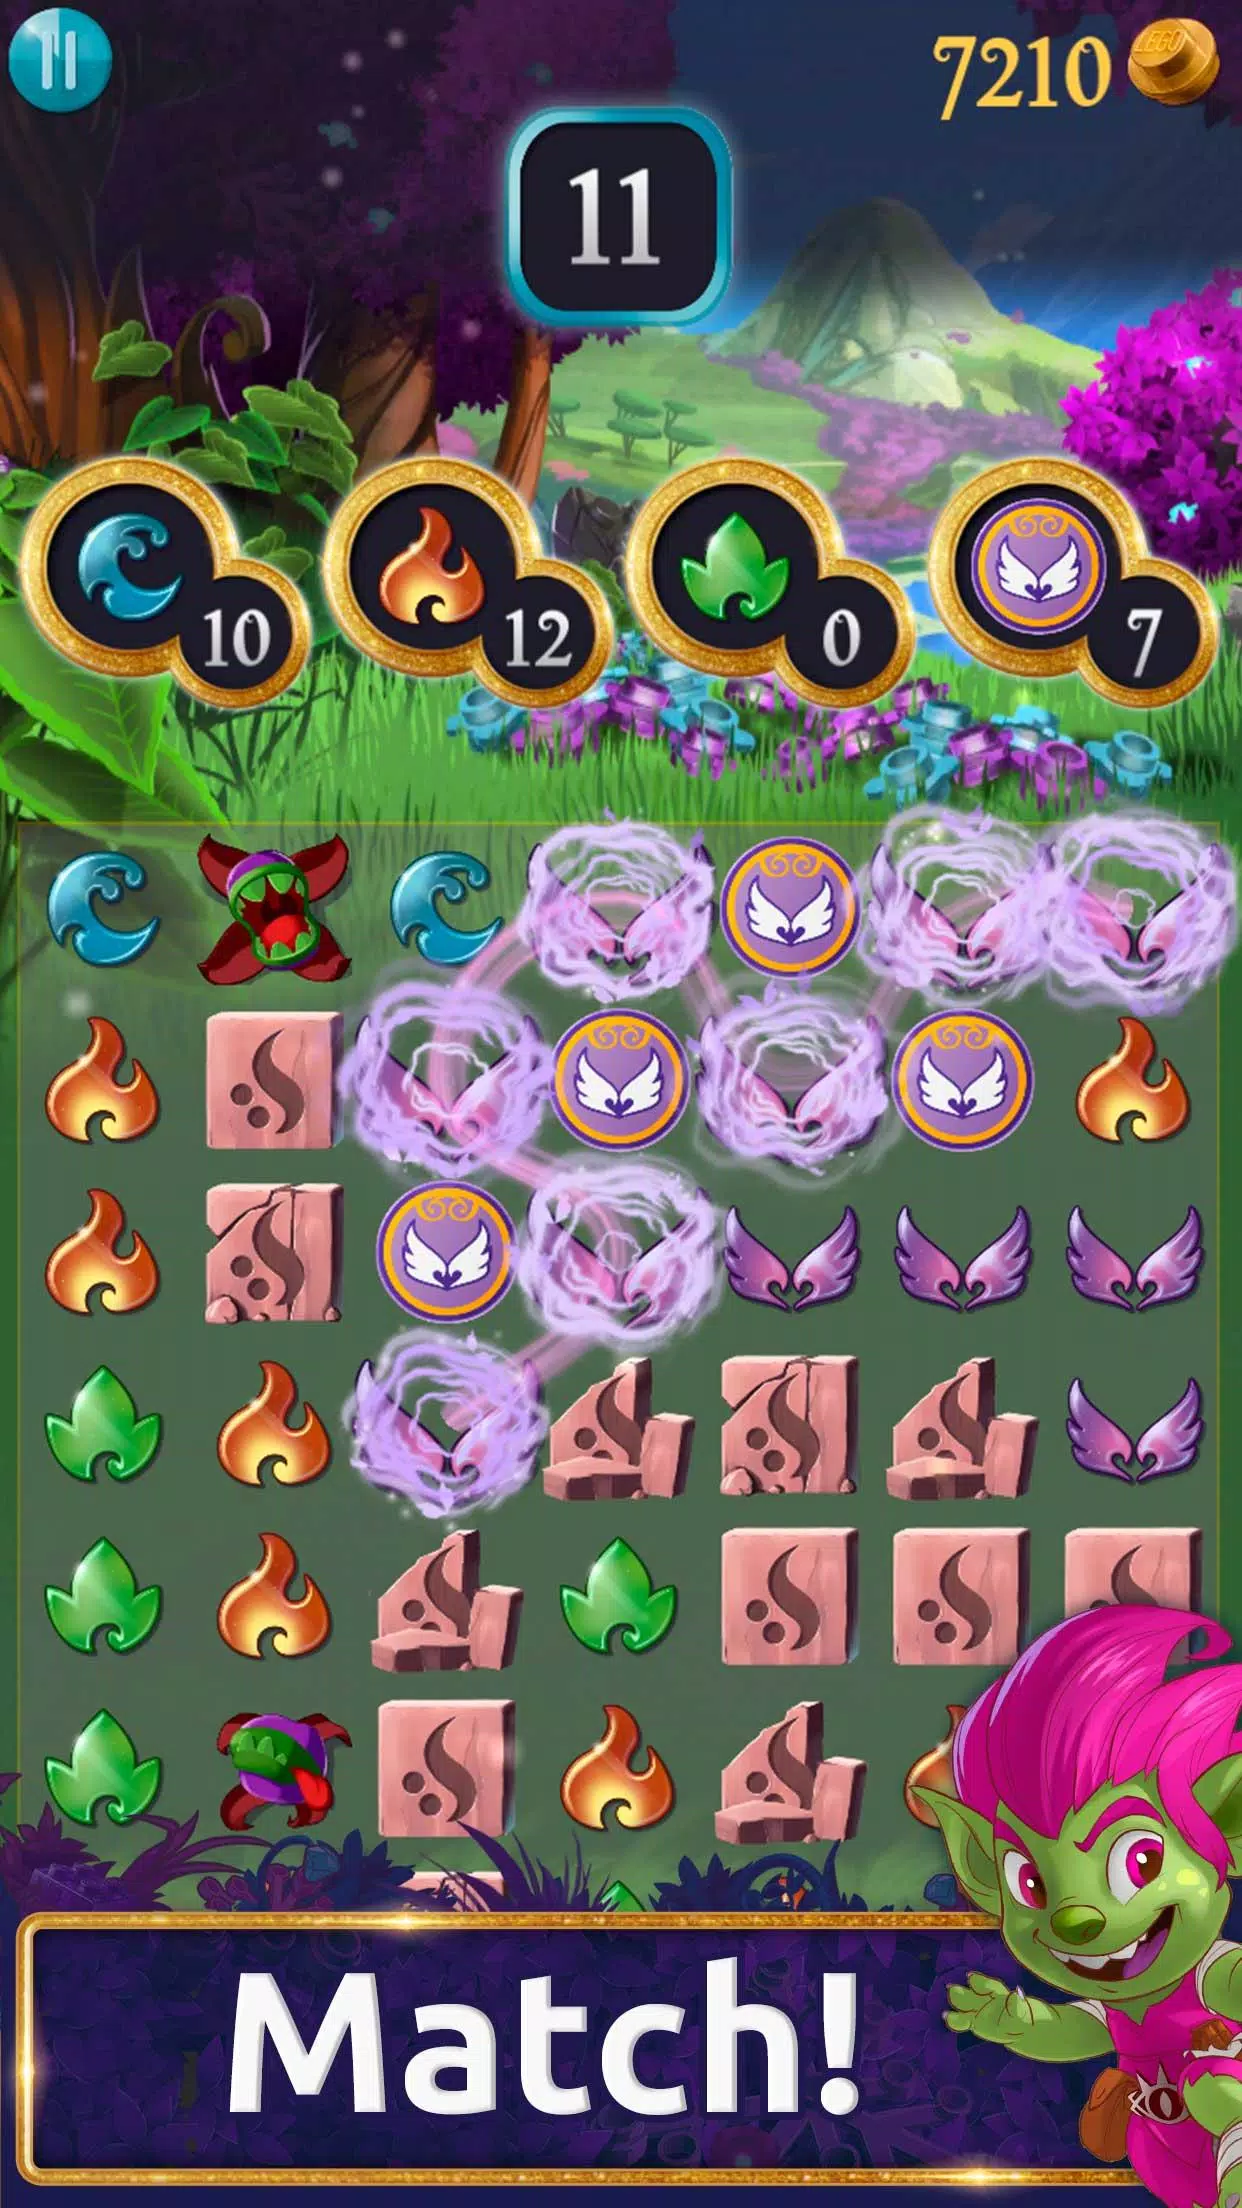 LEGO® Elves Match Game with Dragons and Building for Android - APK Download